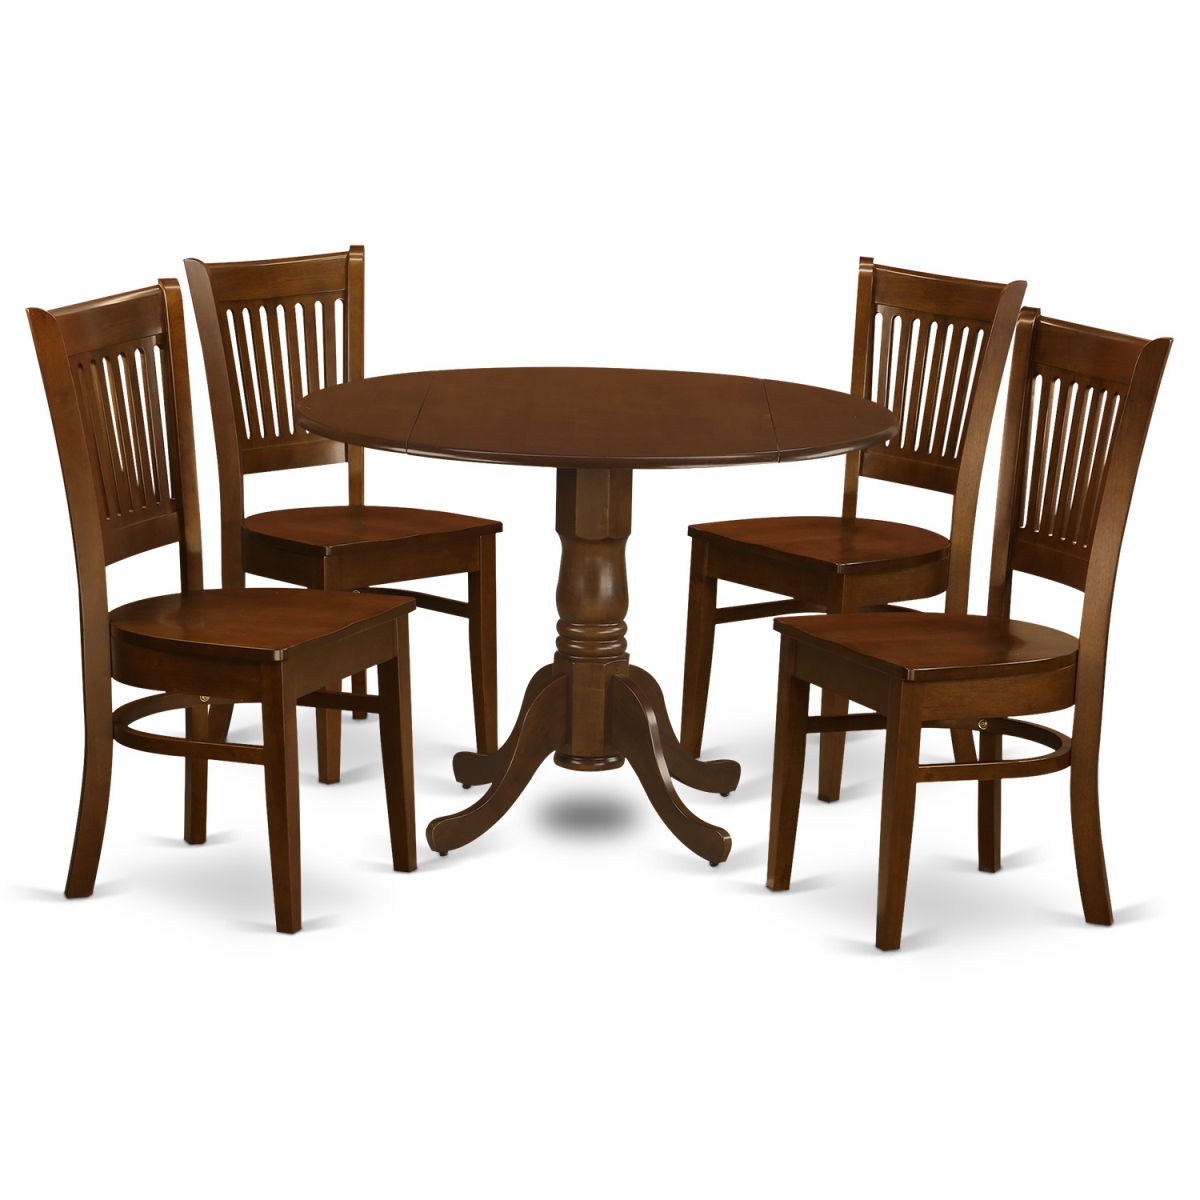 Picture of East West Furniture DLVA5-ESP-W Dublin Table with 2 Drop - Leaf & 4 Solid Wood Chairs, Espresso - 9 in. - 5 Piece